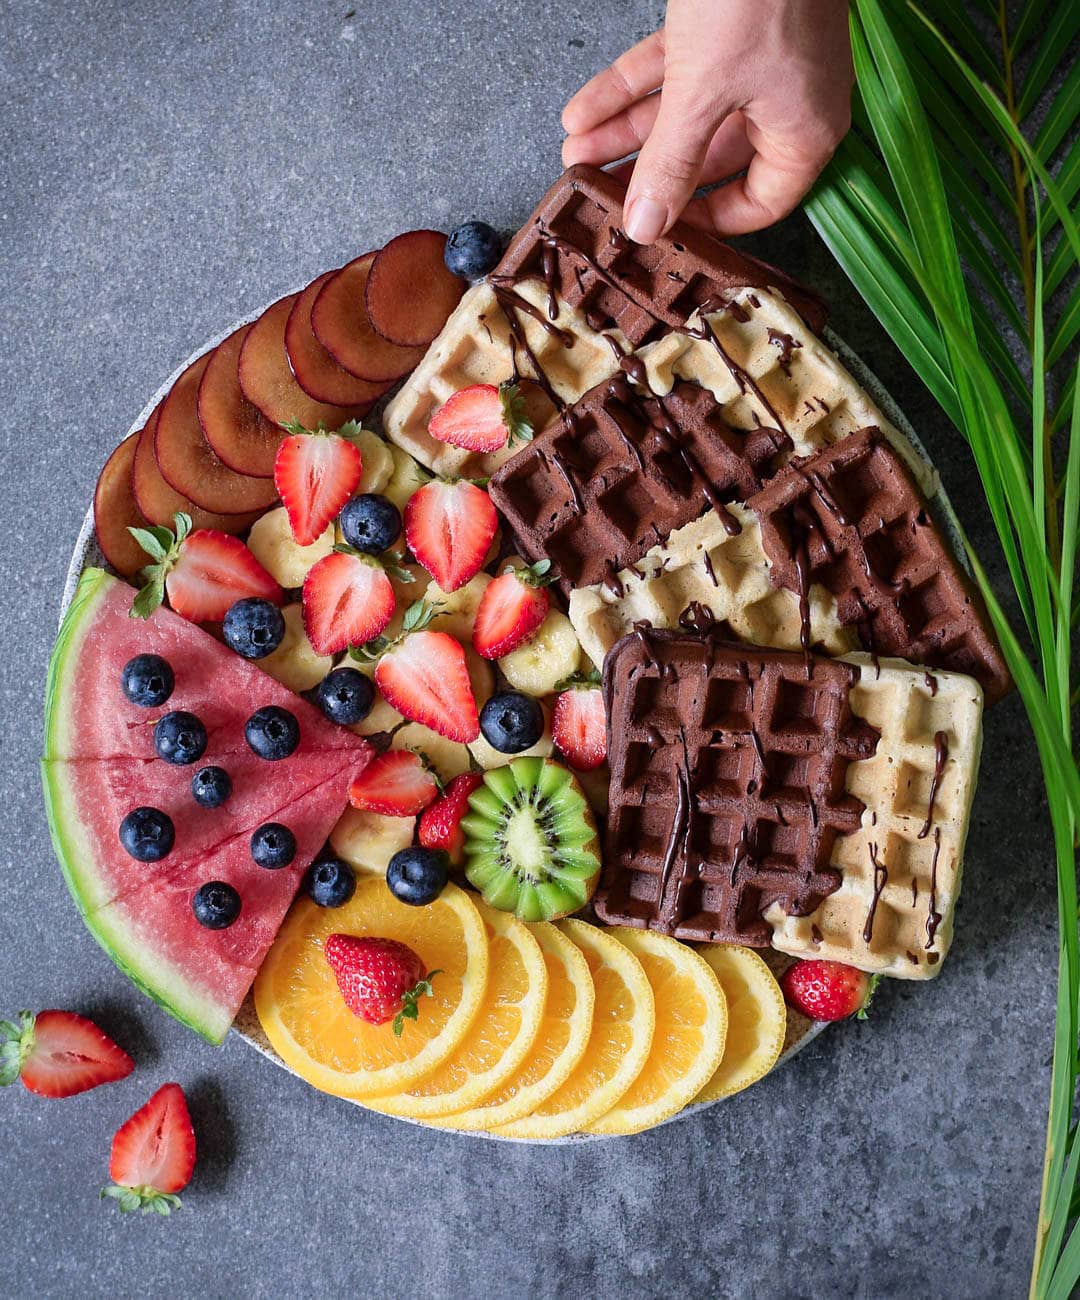 Hand grabbing homemade gluten-free vegan waffles with fruits, a chocolate sauce, arranged on a board